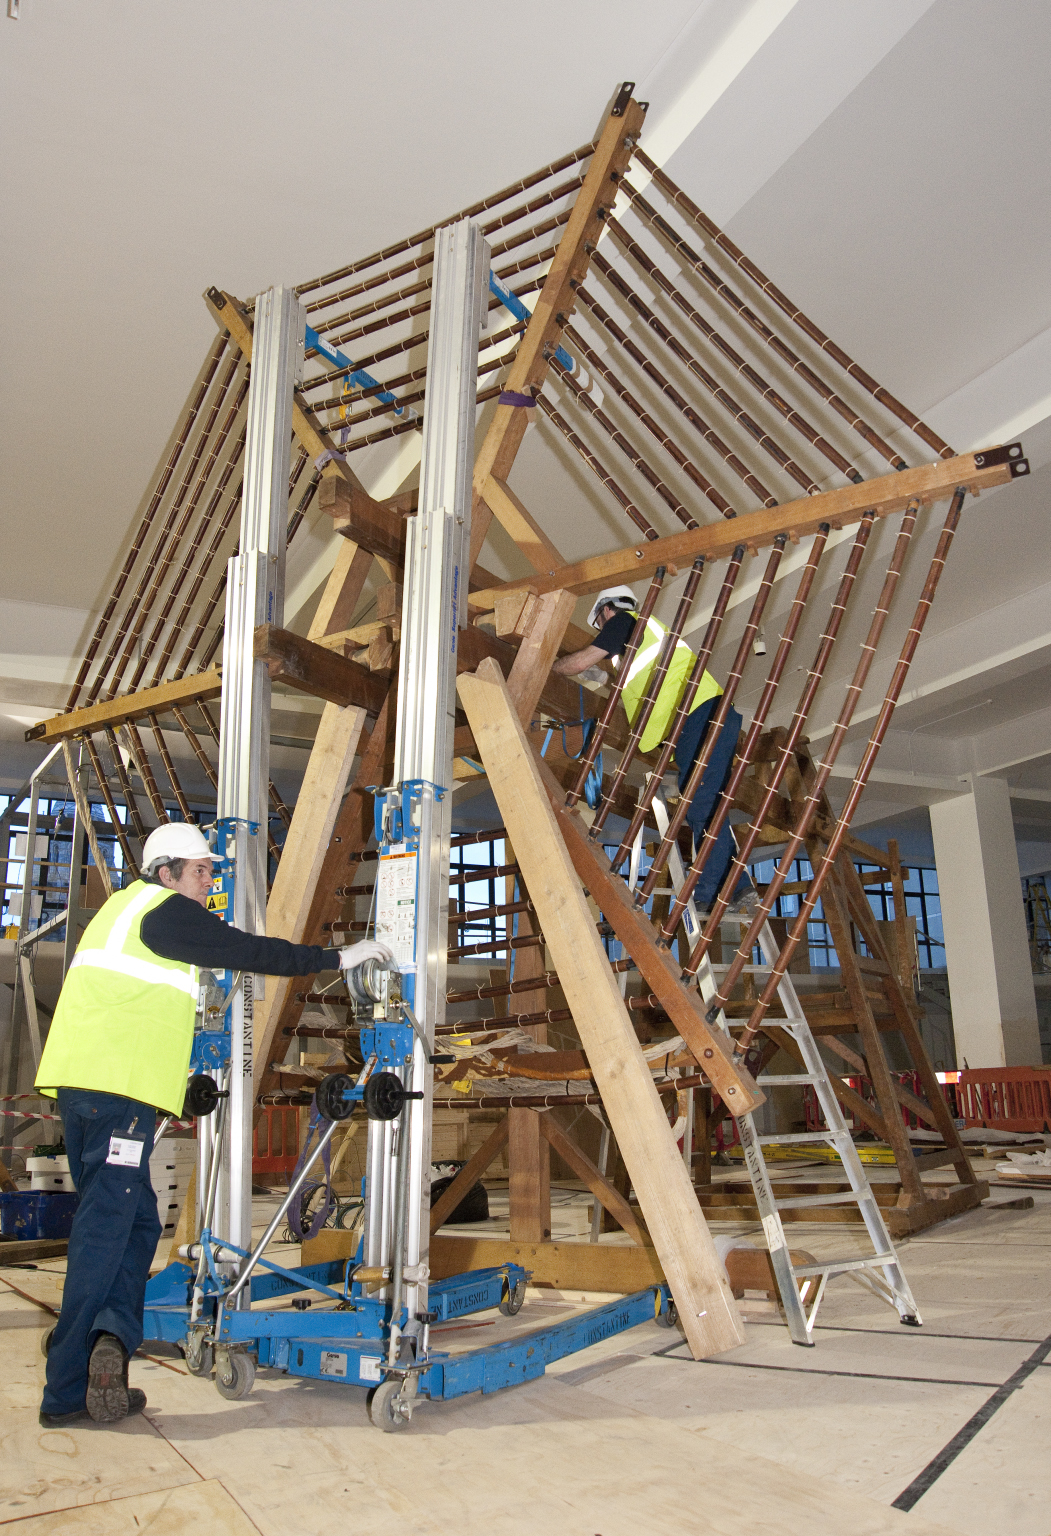 The enormous Rugby Tuning Coil being installed inside the Information Age gallery. Image credits: Science Museum